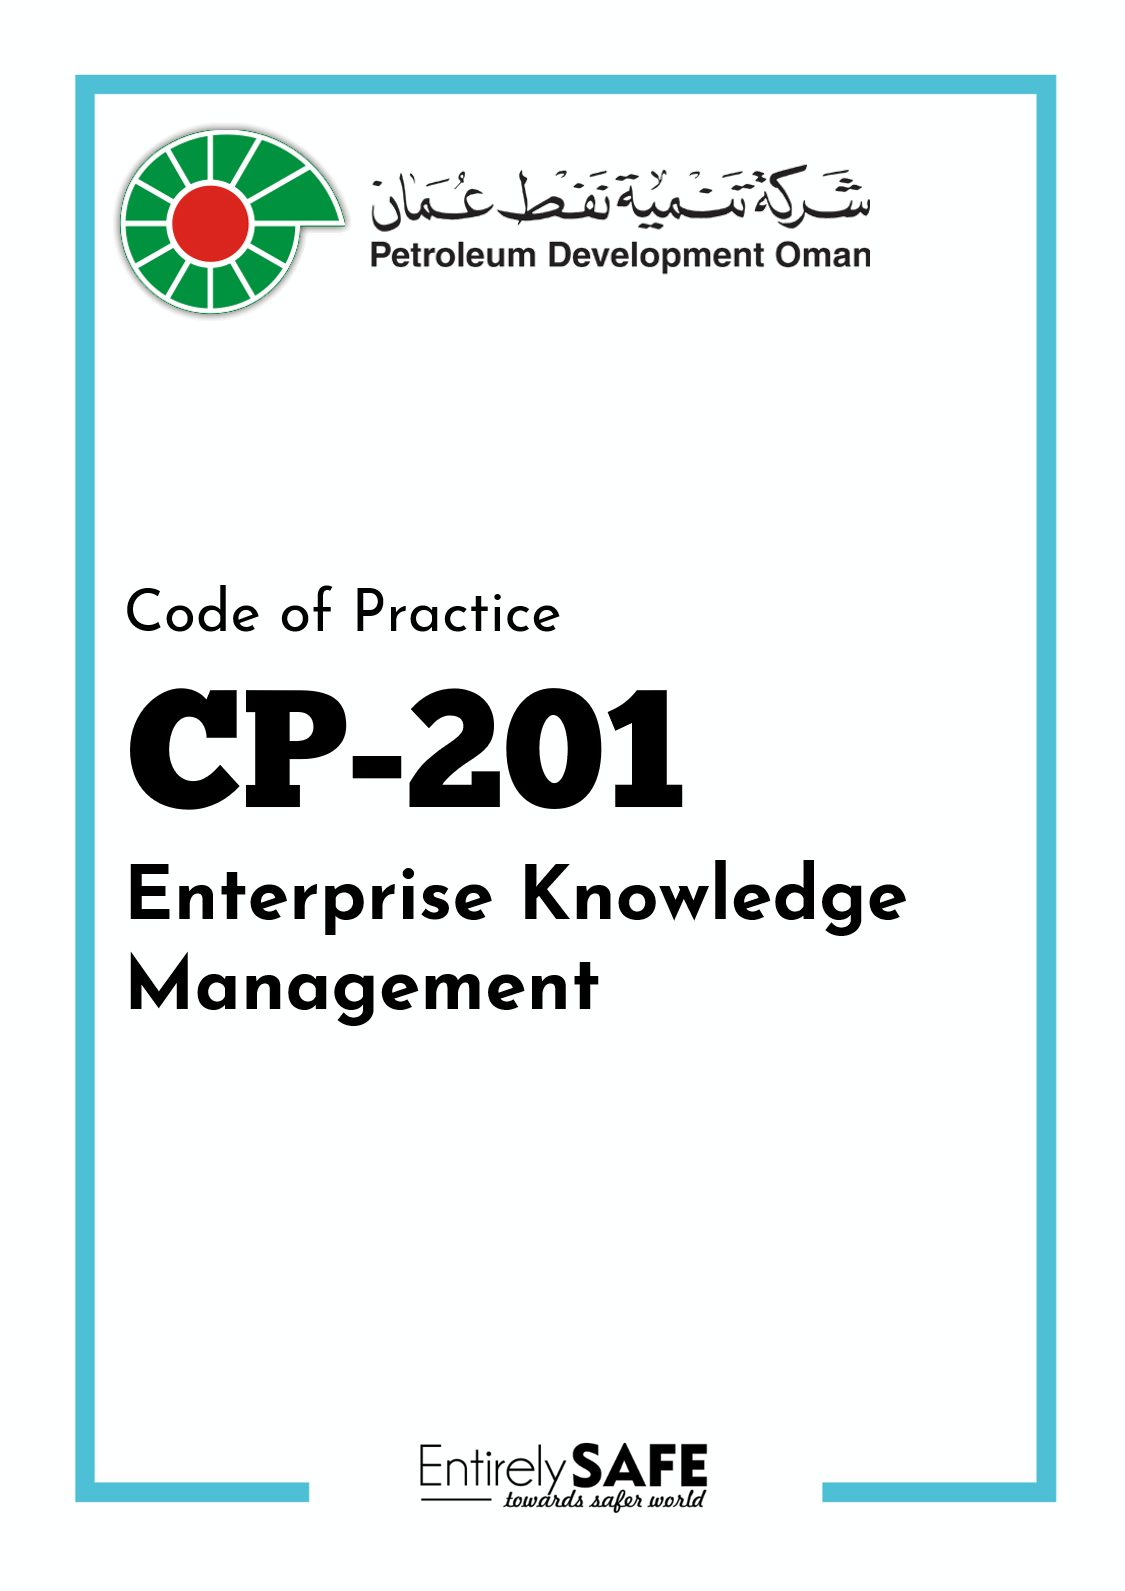 CP-201-Enterprise-Knowledge-Management-Code-of-Practice-PDO